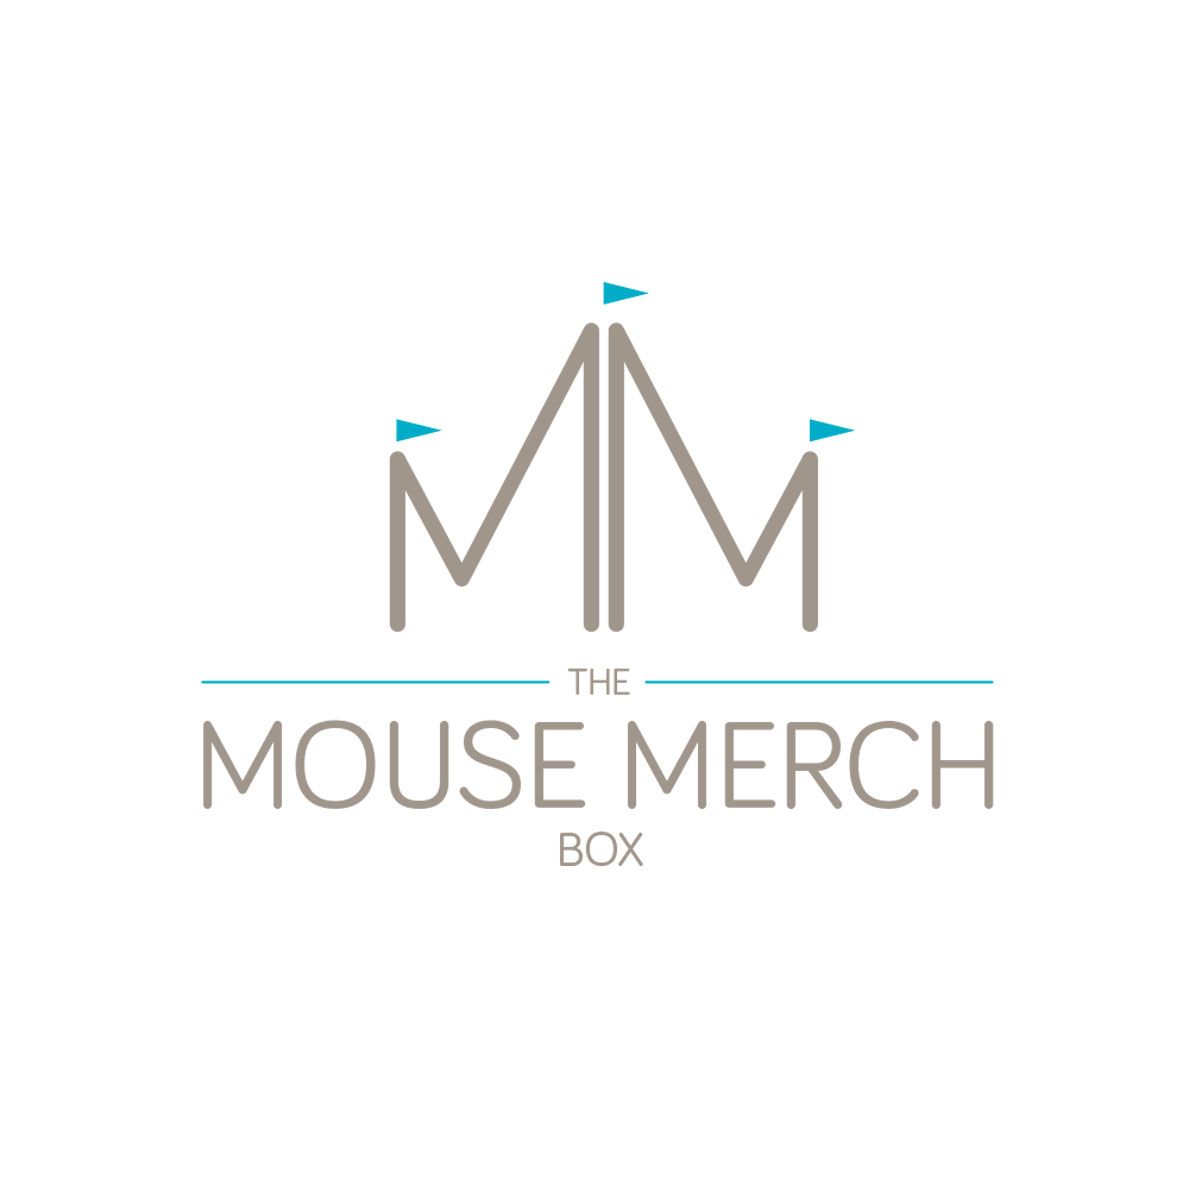 The Mouse Merch Box coupons and promo codes